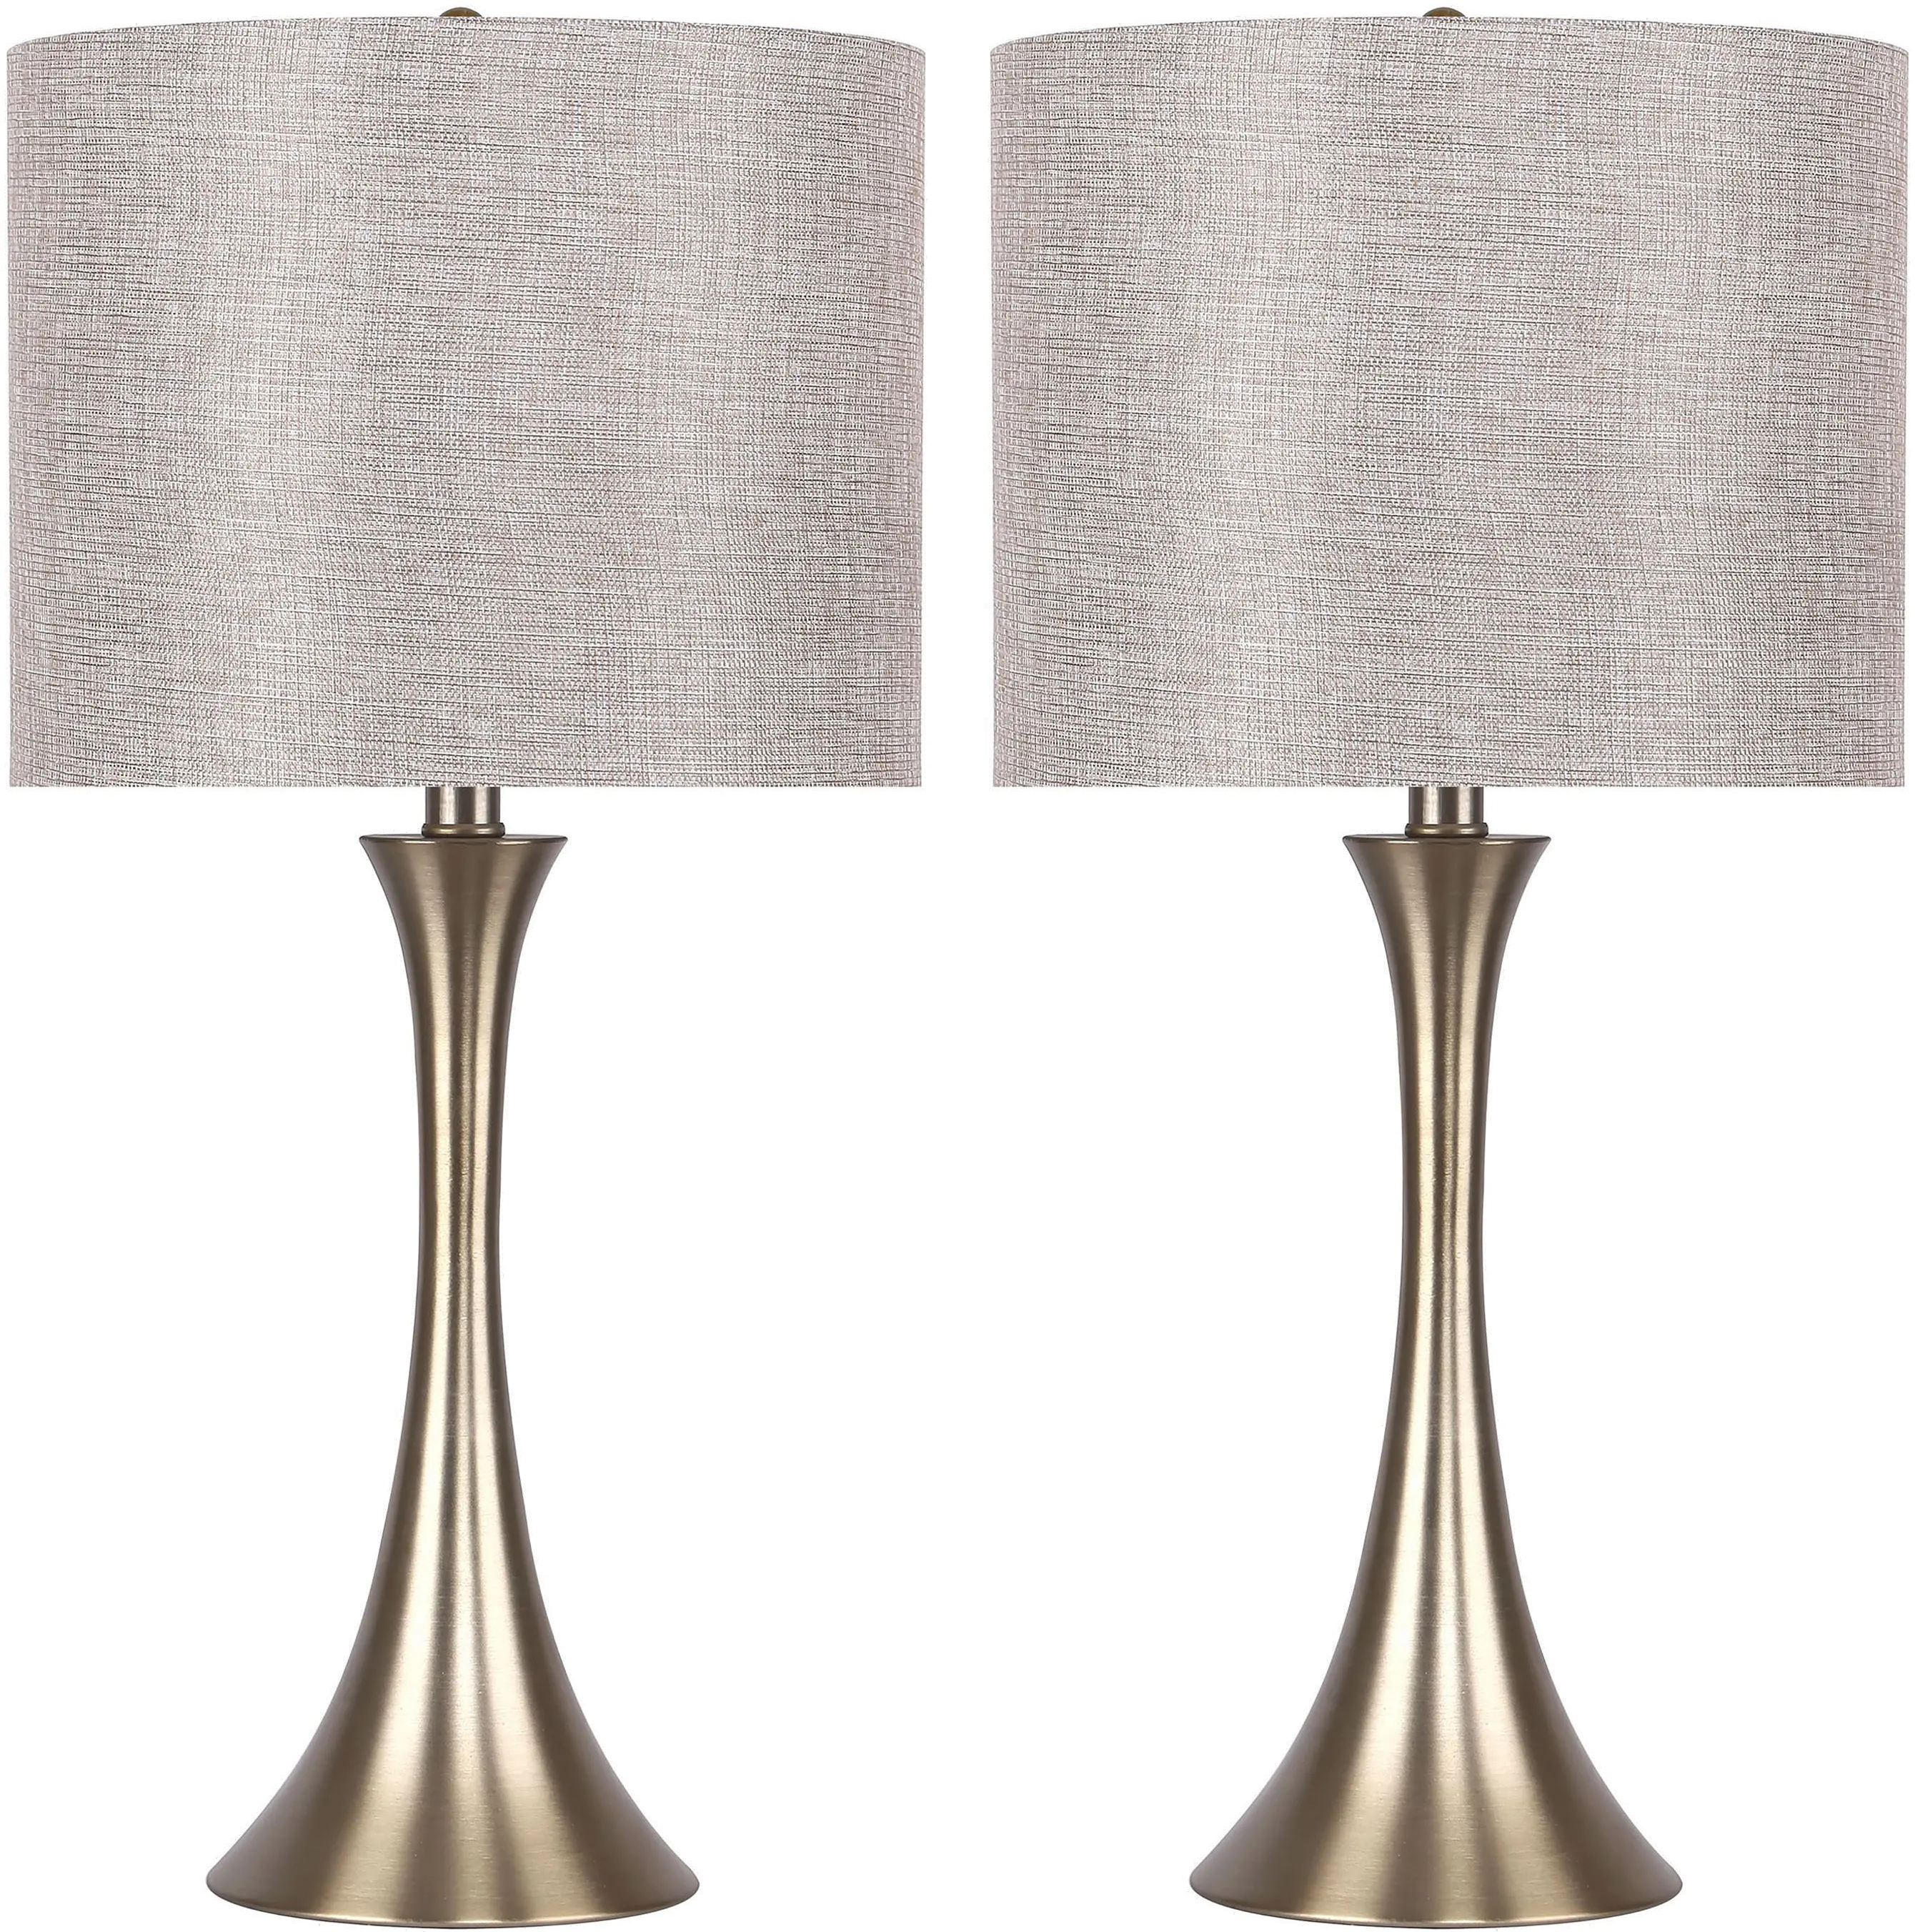 Lenuxe Gold Table Lamps with Gold Shades, Set of 2